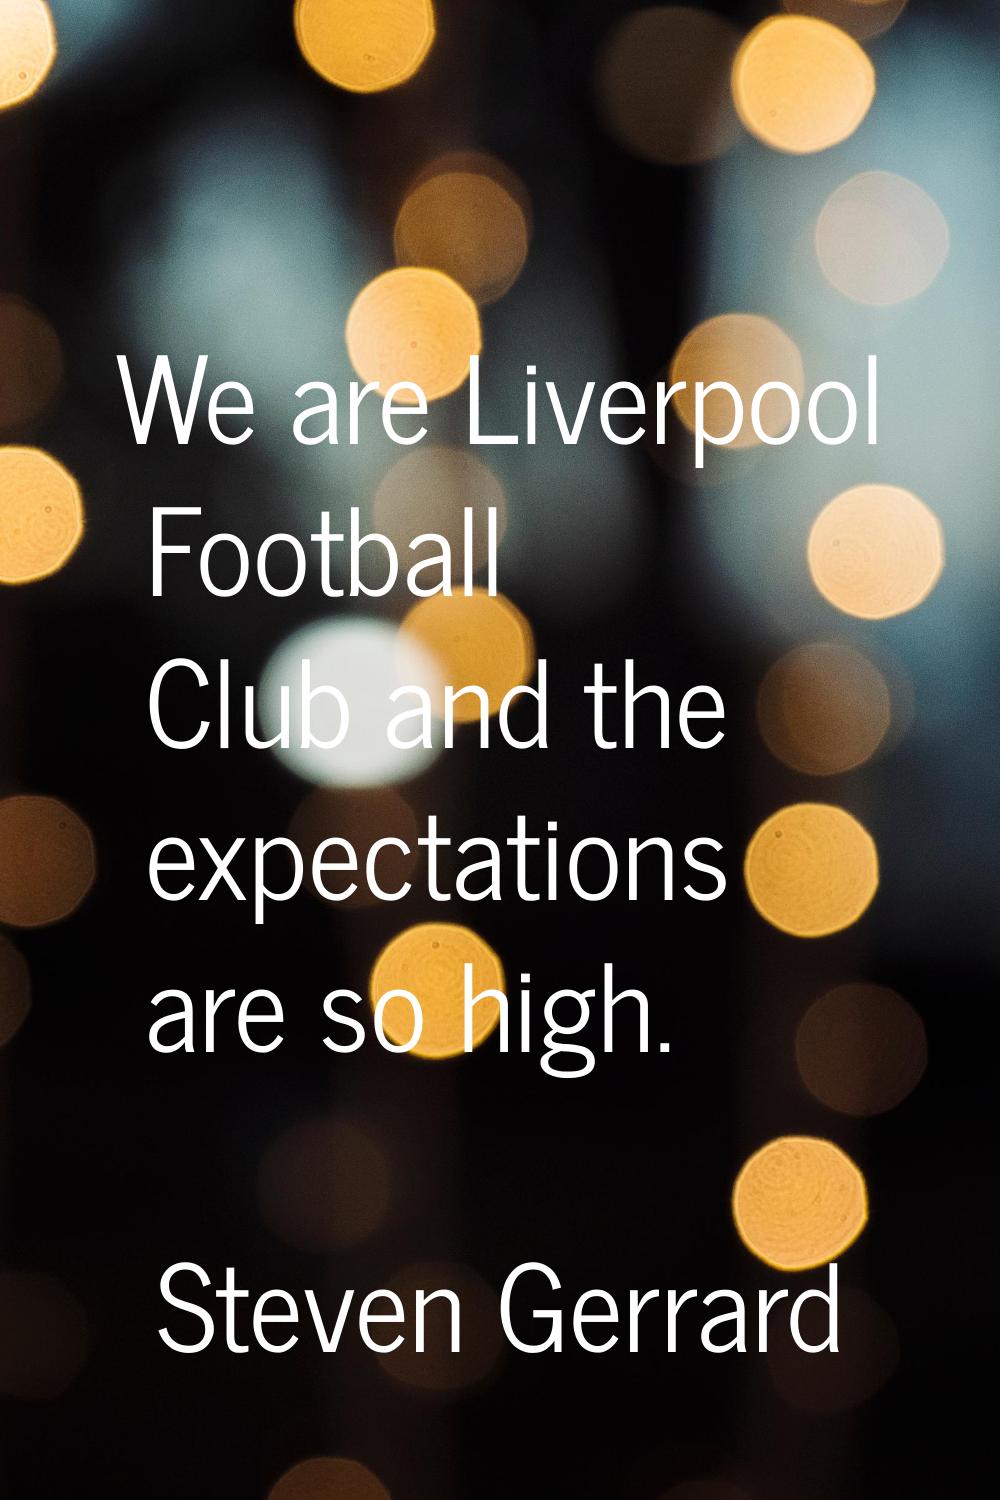 We are Liverpool Football Club and the expectations are so high.